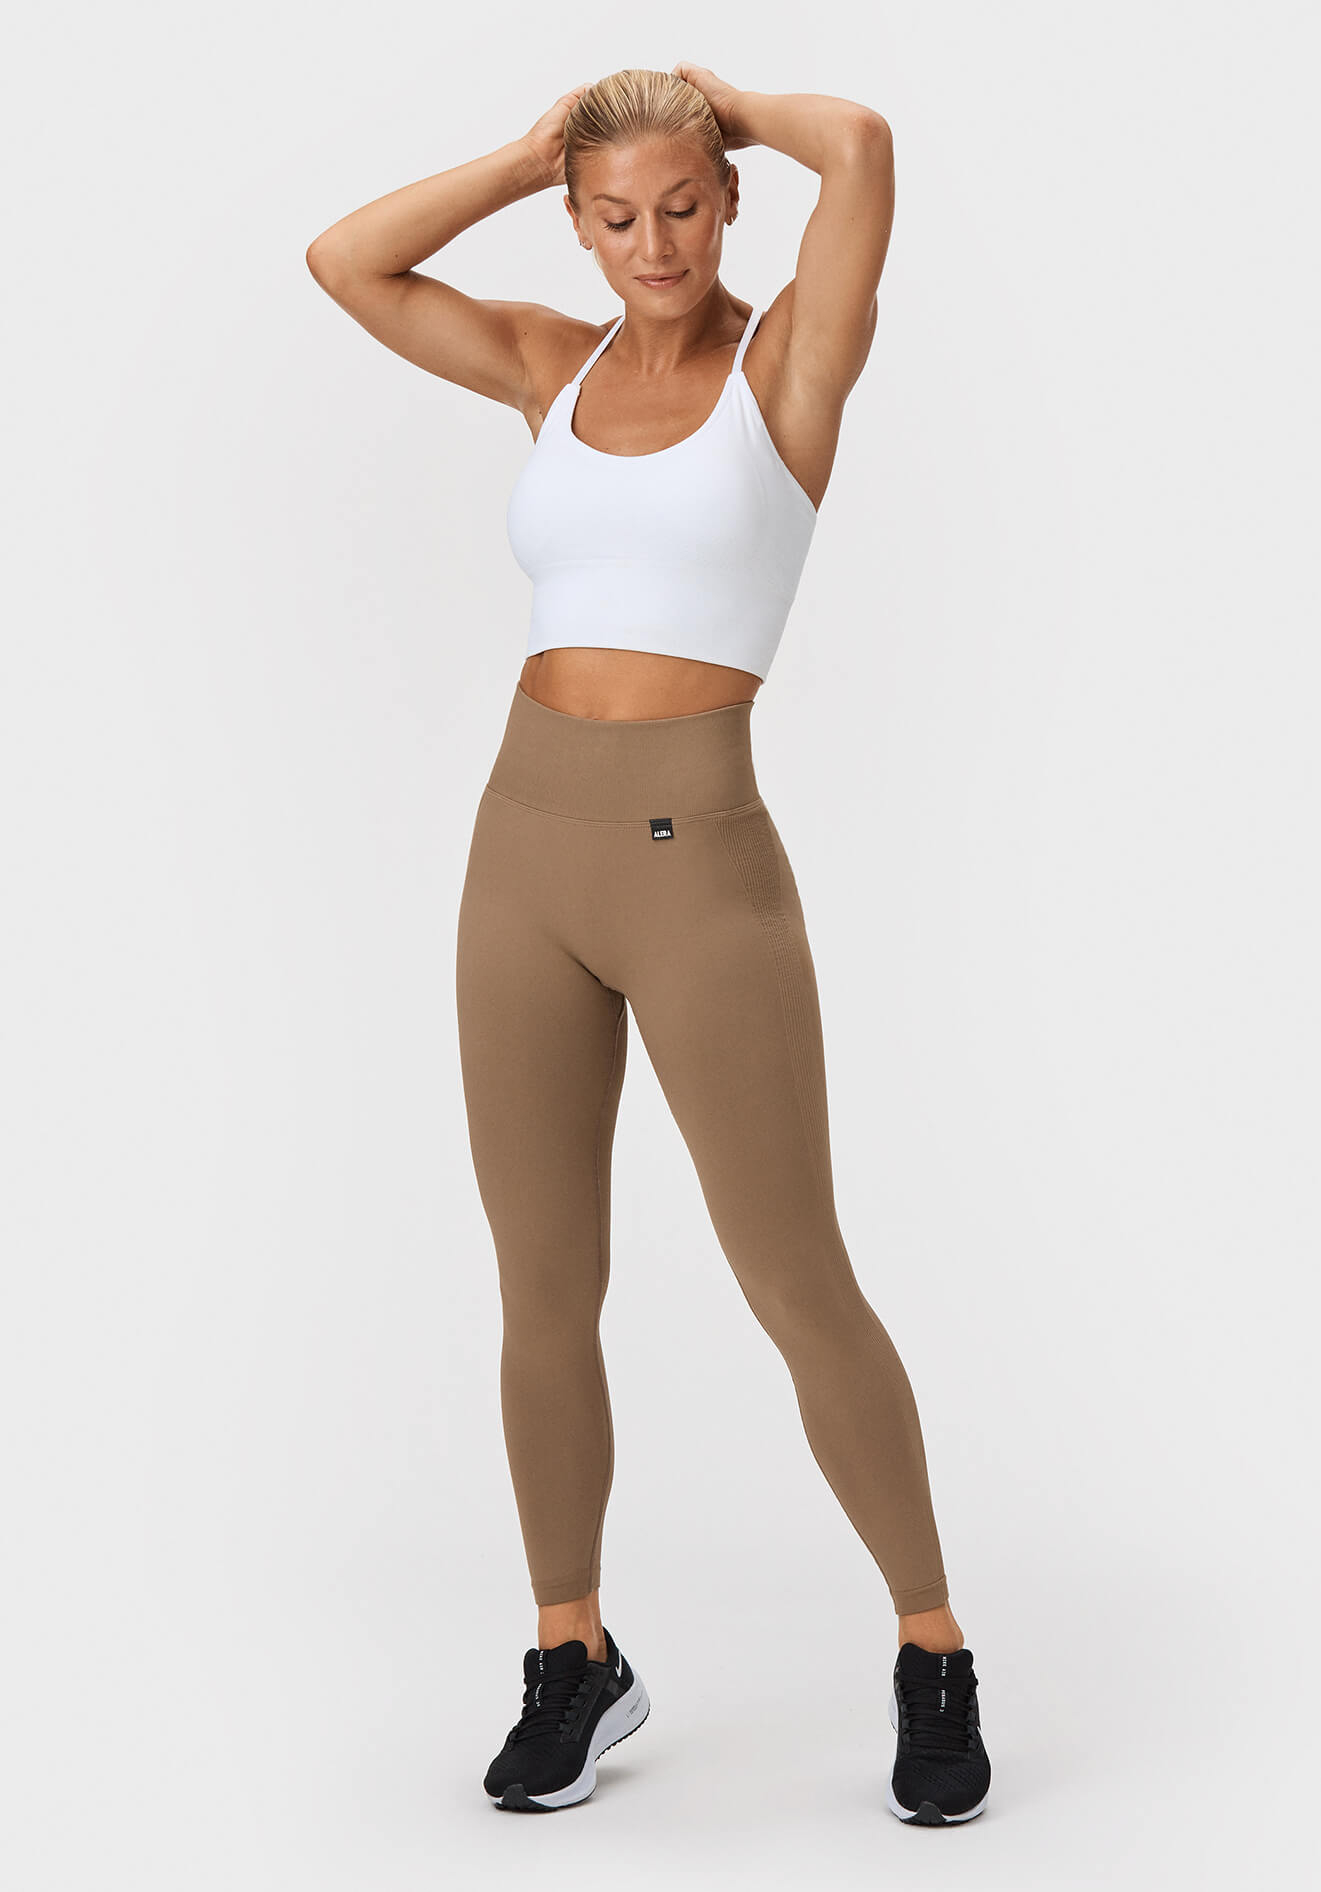 Alera - Ethereal Scrunch Tights - One More Rep